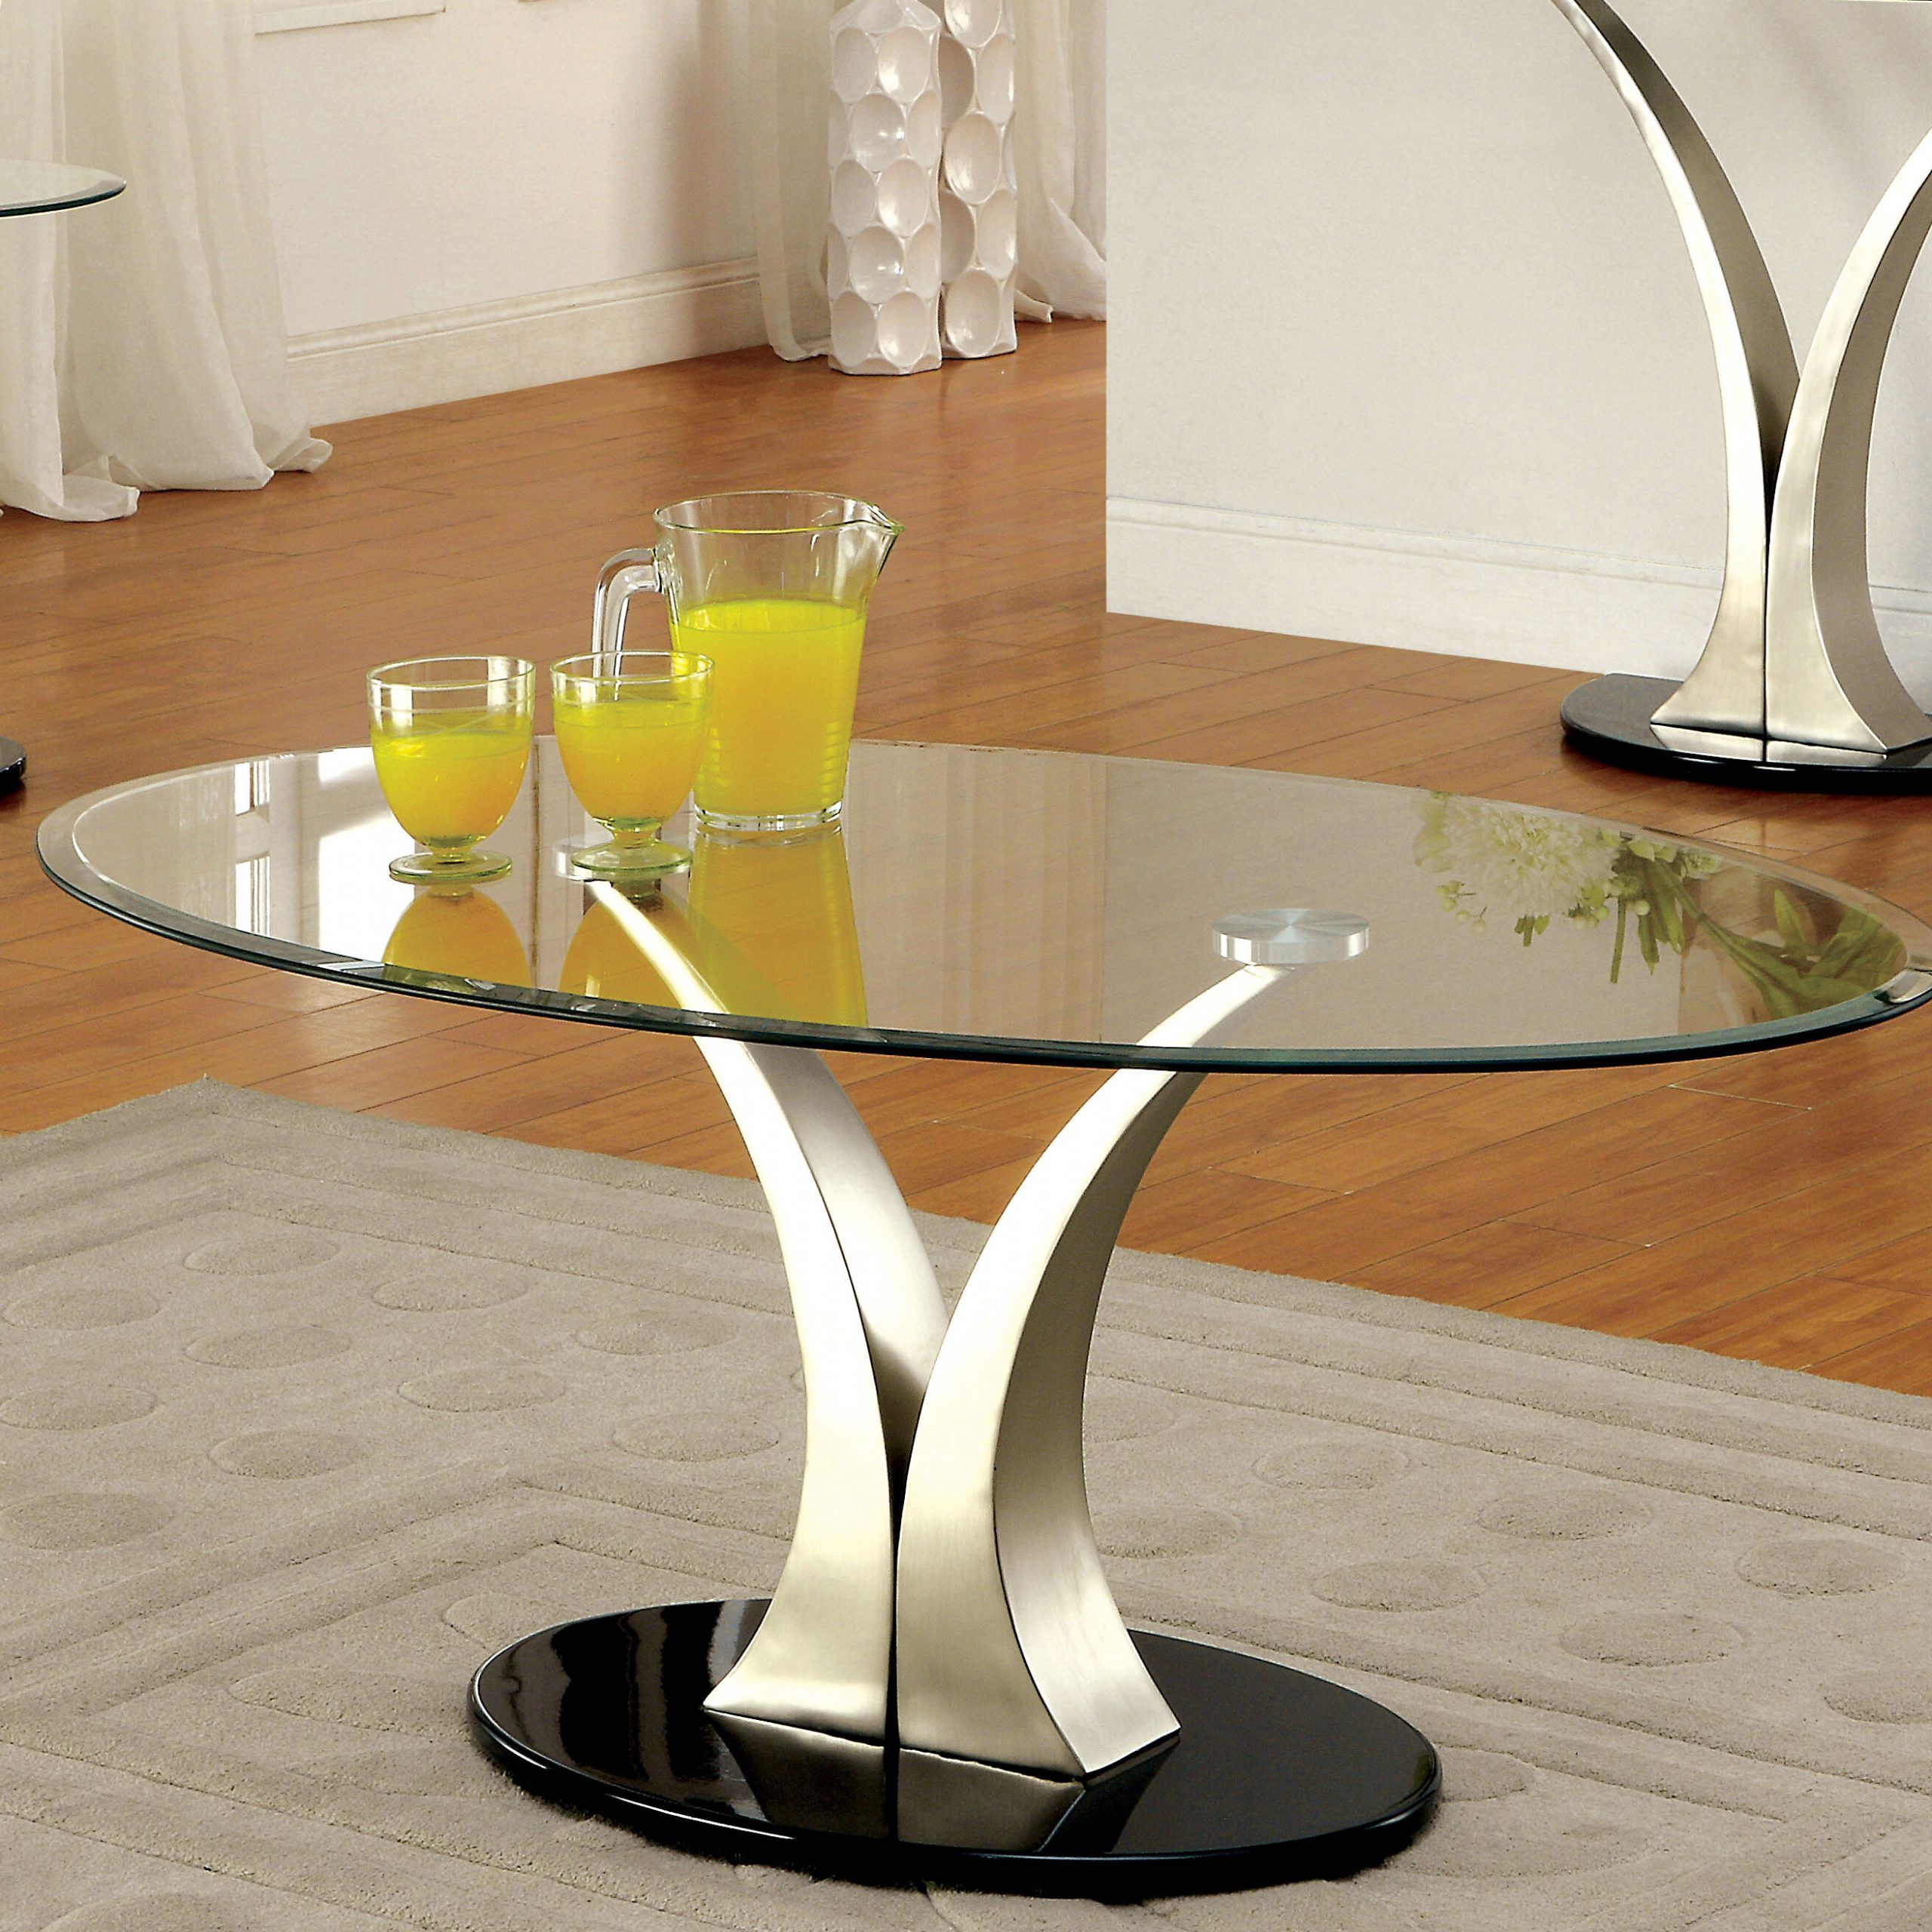 Ivy Bronx Fouts Abstract Coffee Table & Reviews | Wayfair Regarding Glass Oval Coffee Tables (Gallery 19 of 20)